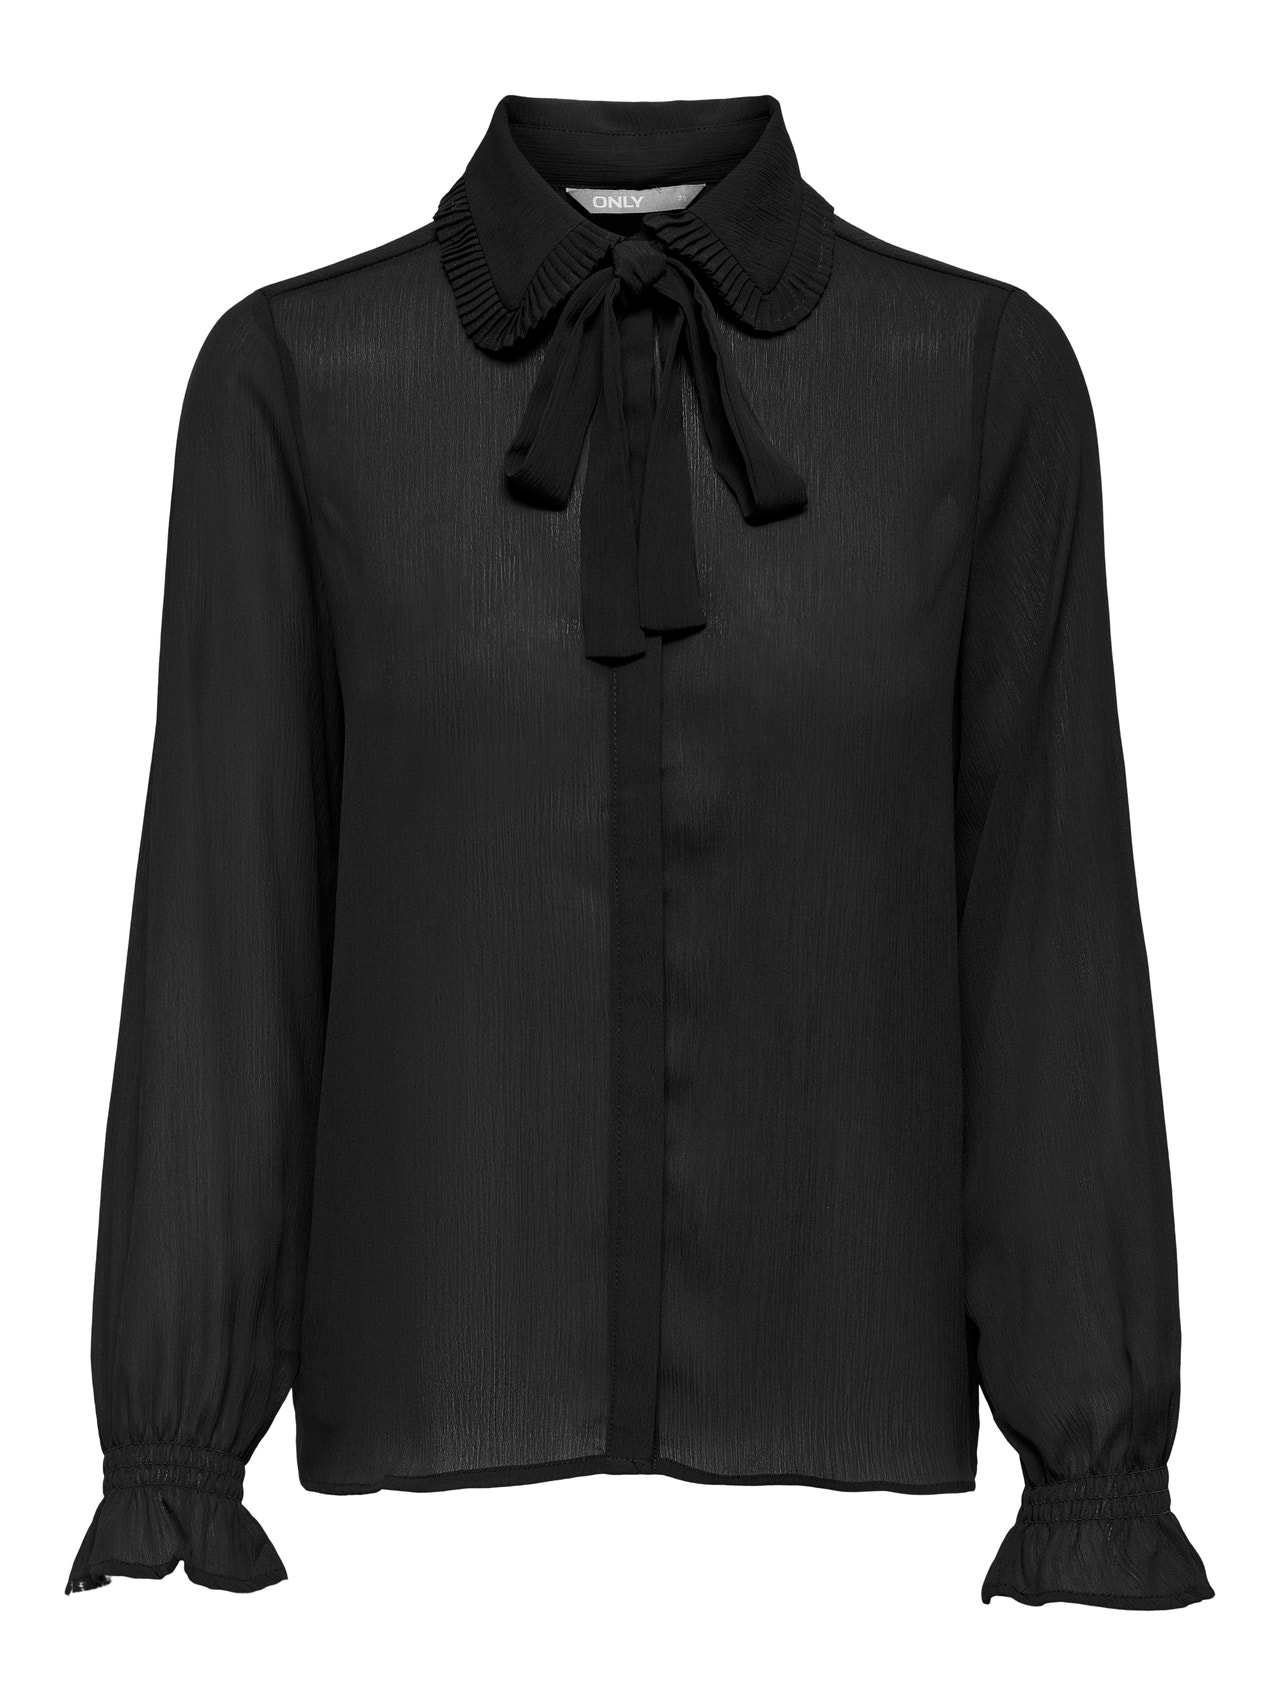 Shirt With Bow Detail | Black | ONLY®